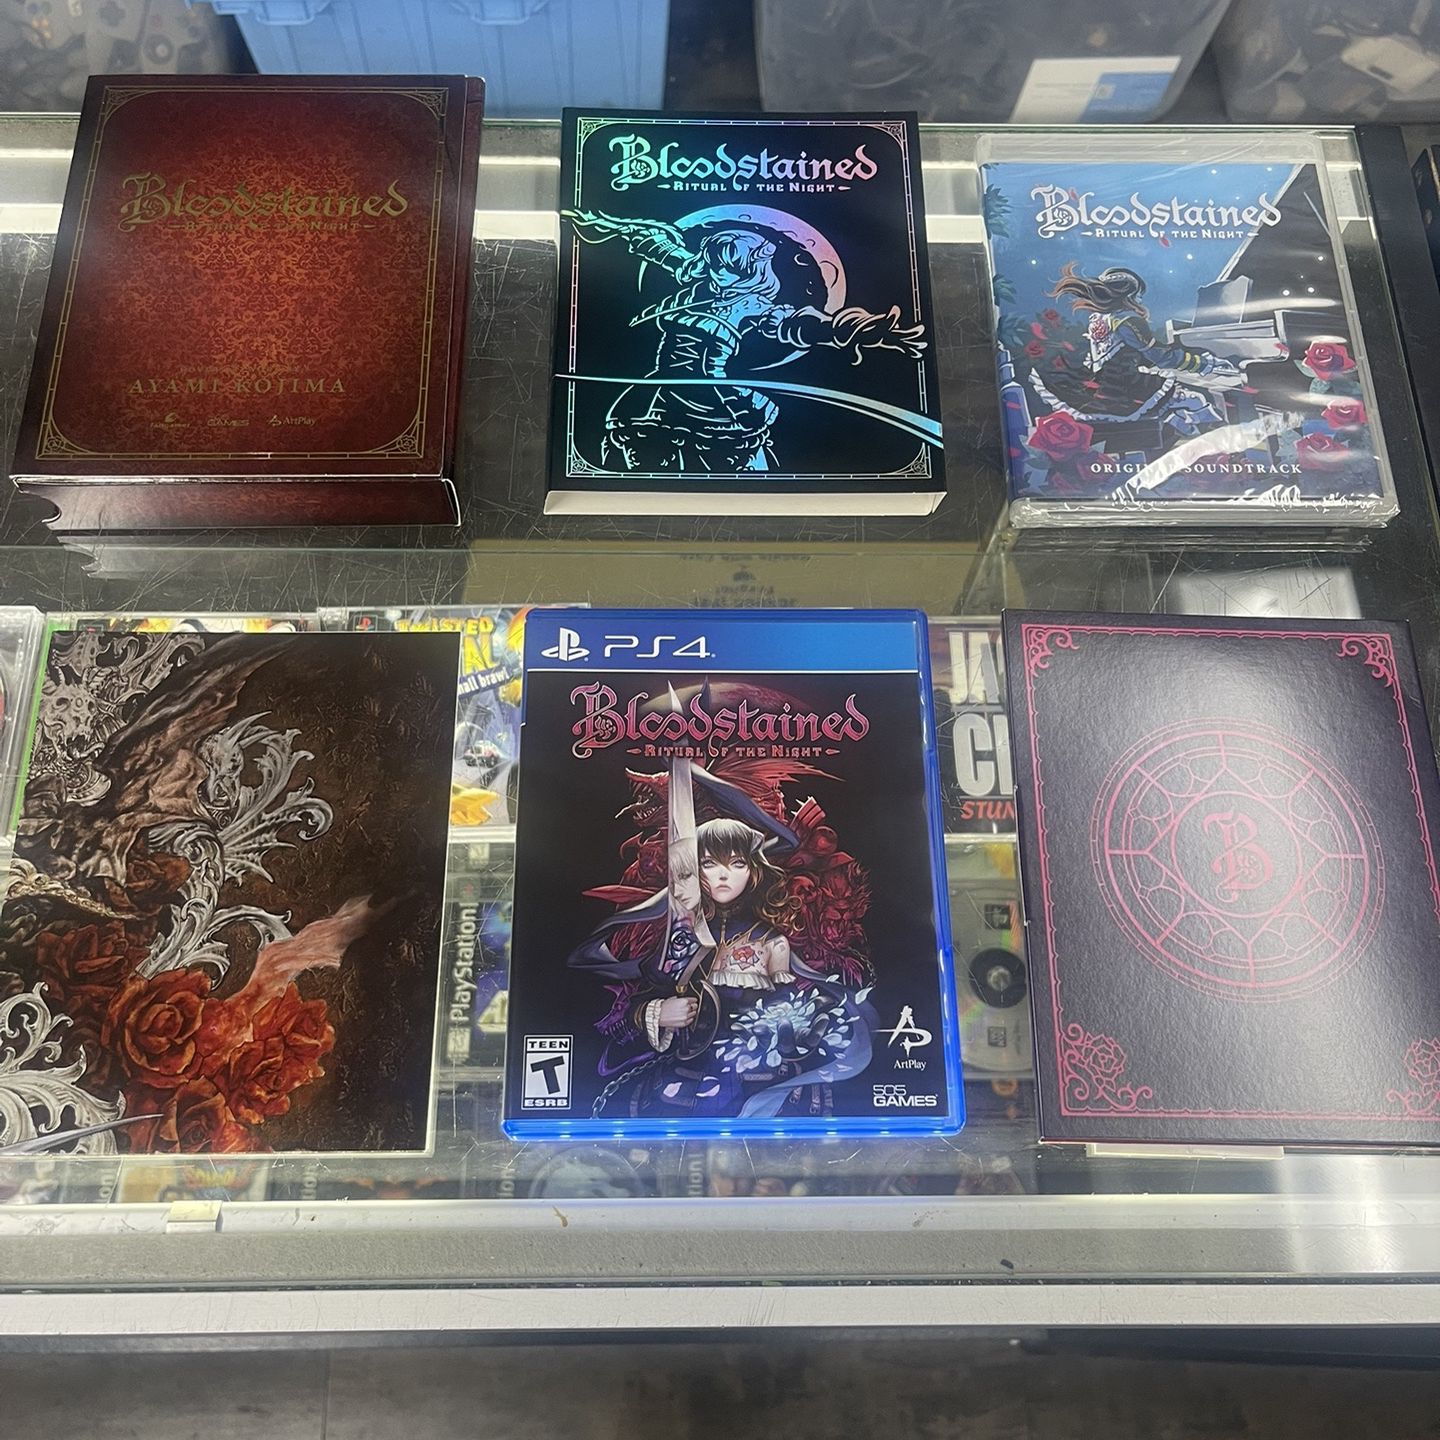 Bloodstained Ritual Of The Night Ps4 Kickstarter Rare $300 Gamehogs 11am-7pm